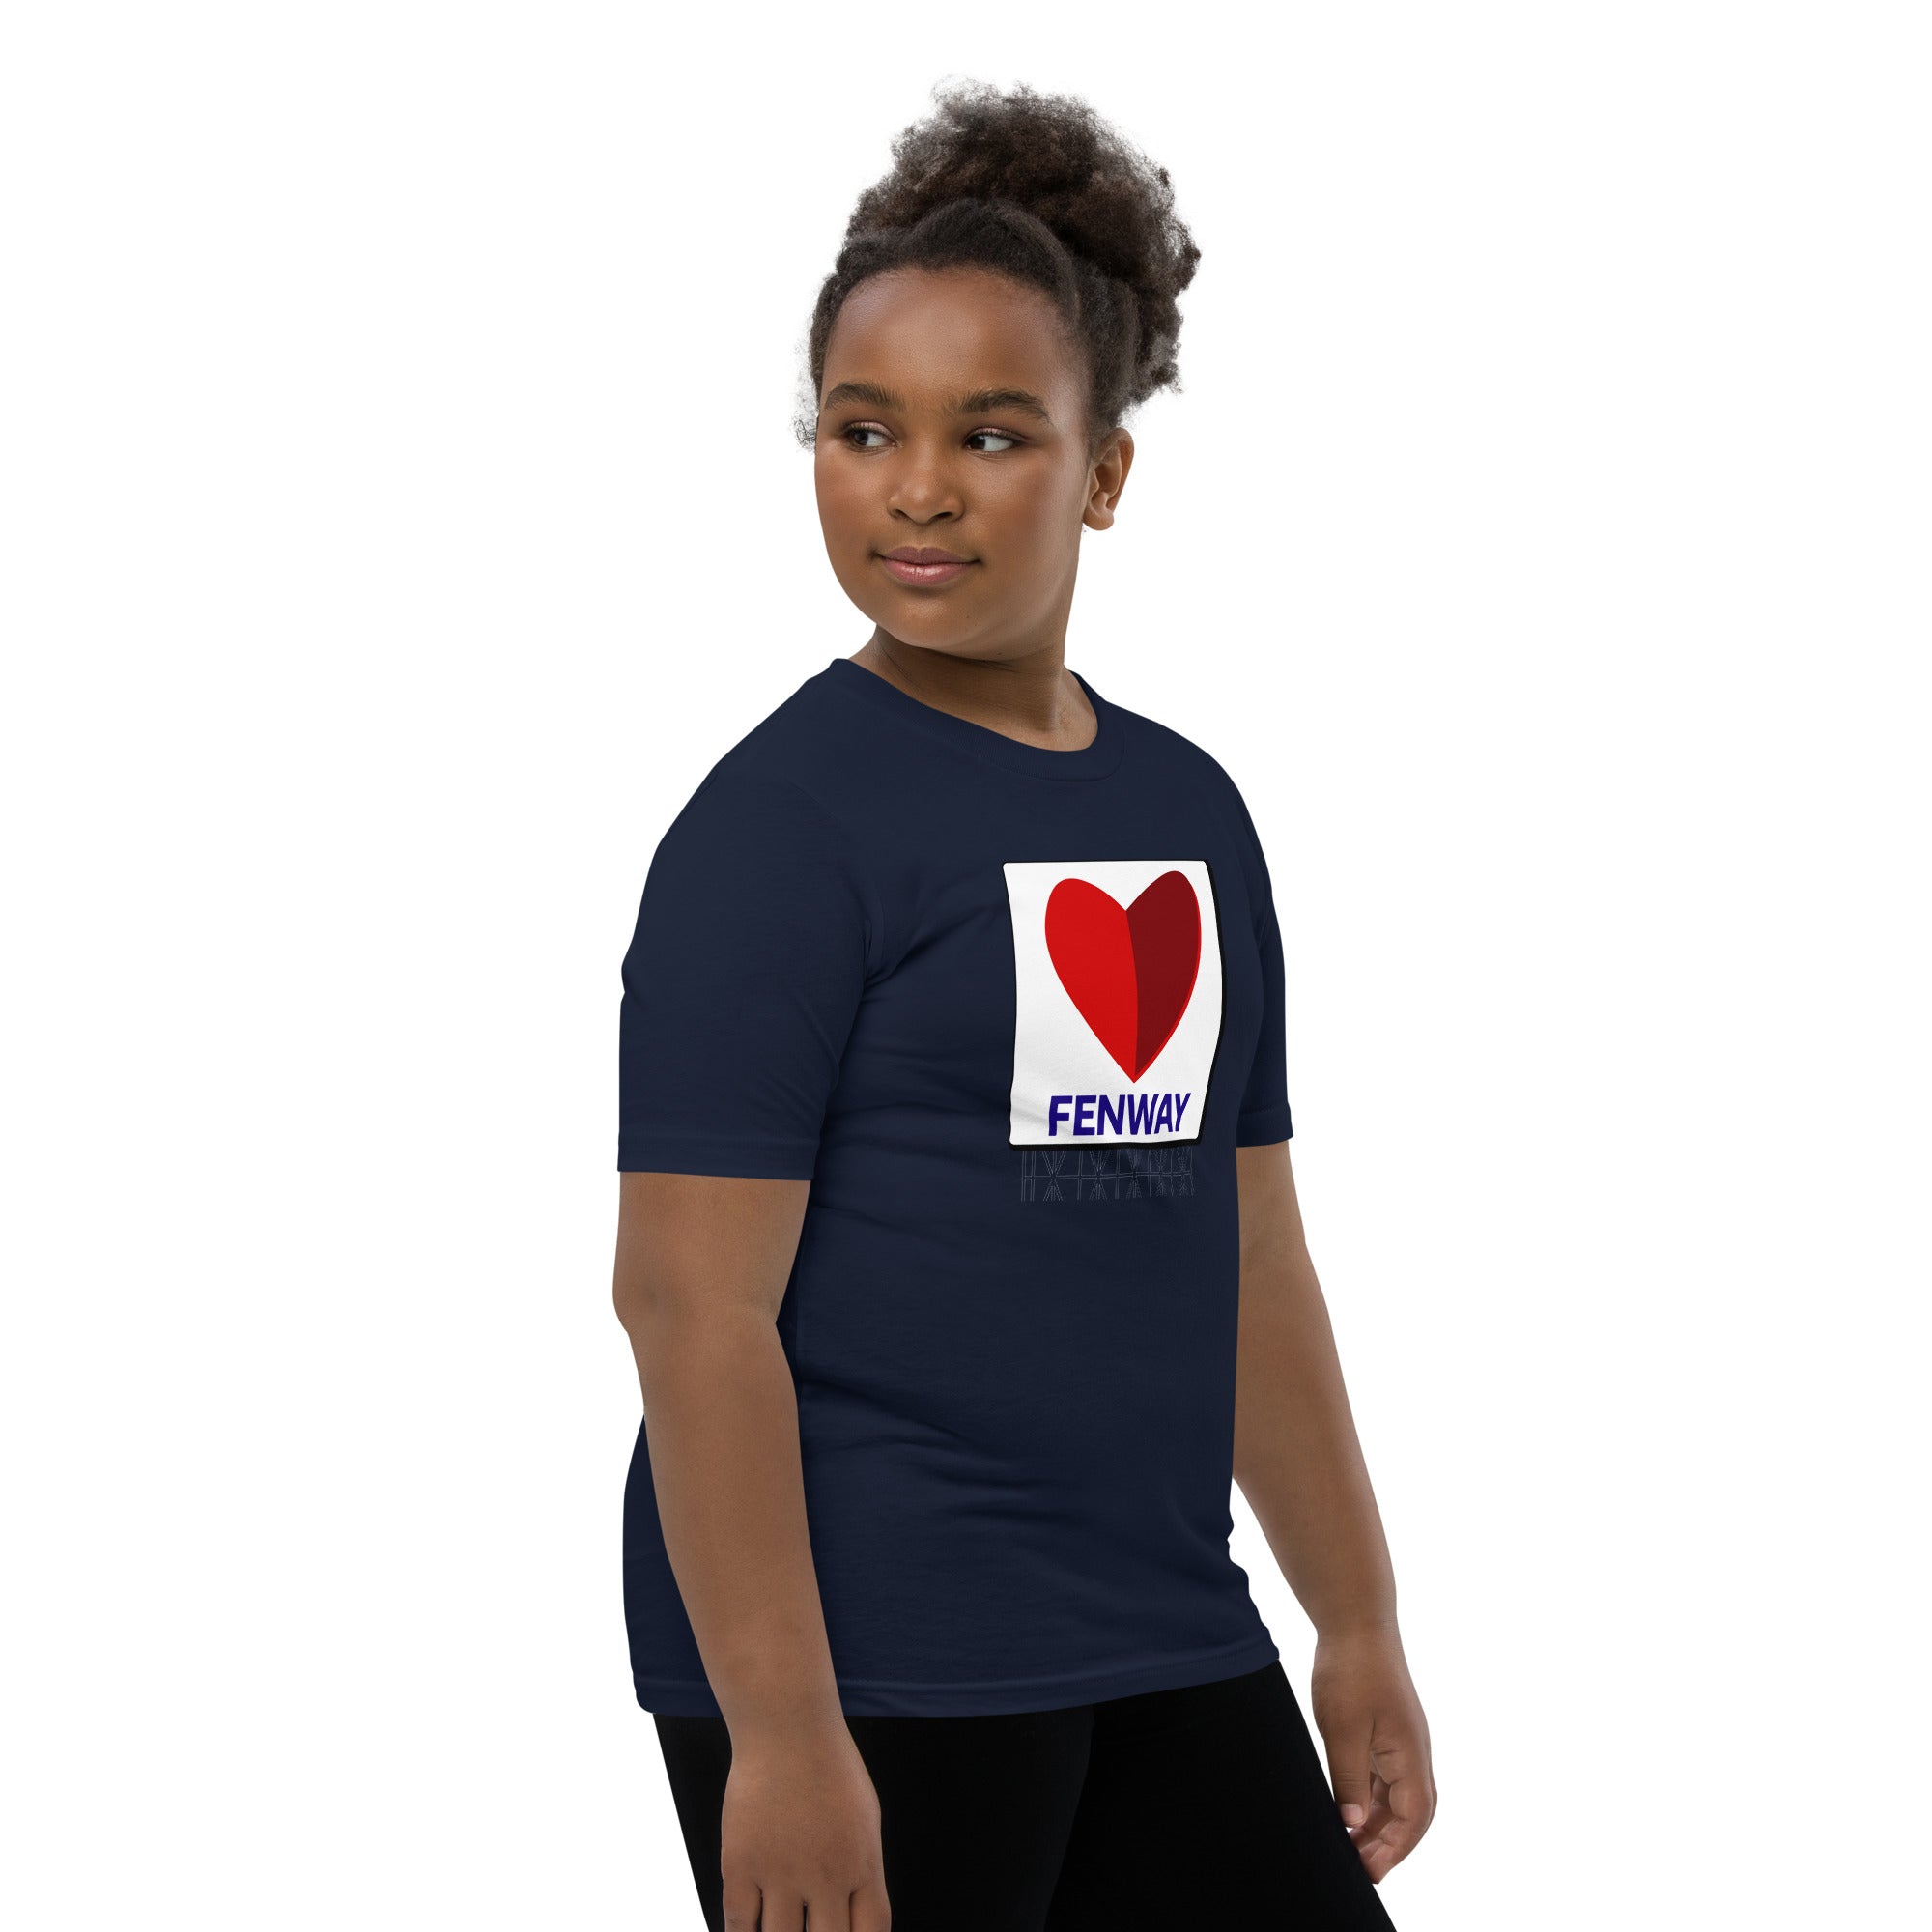 photo of girl wearing a navy blue t-shirt with graphic of the citgo sign boston fenway as a heart